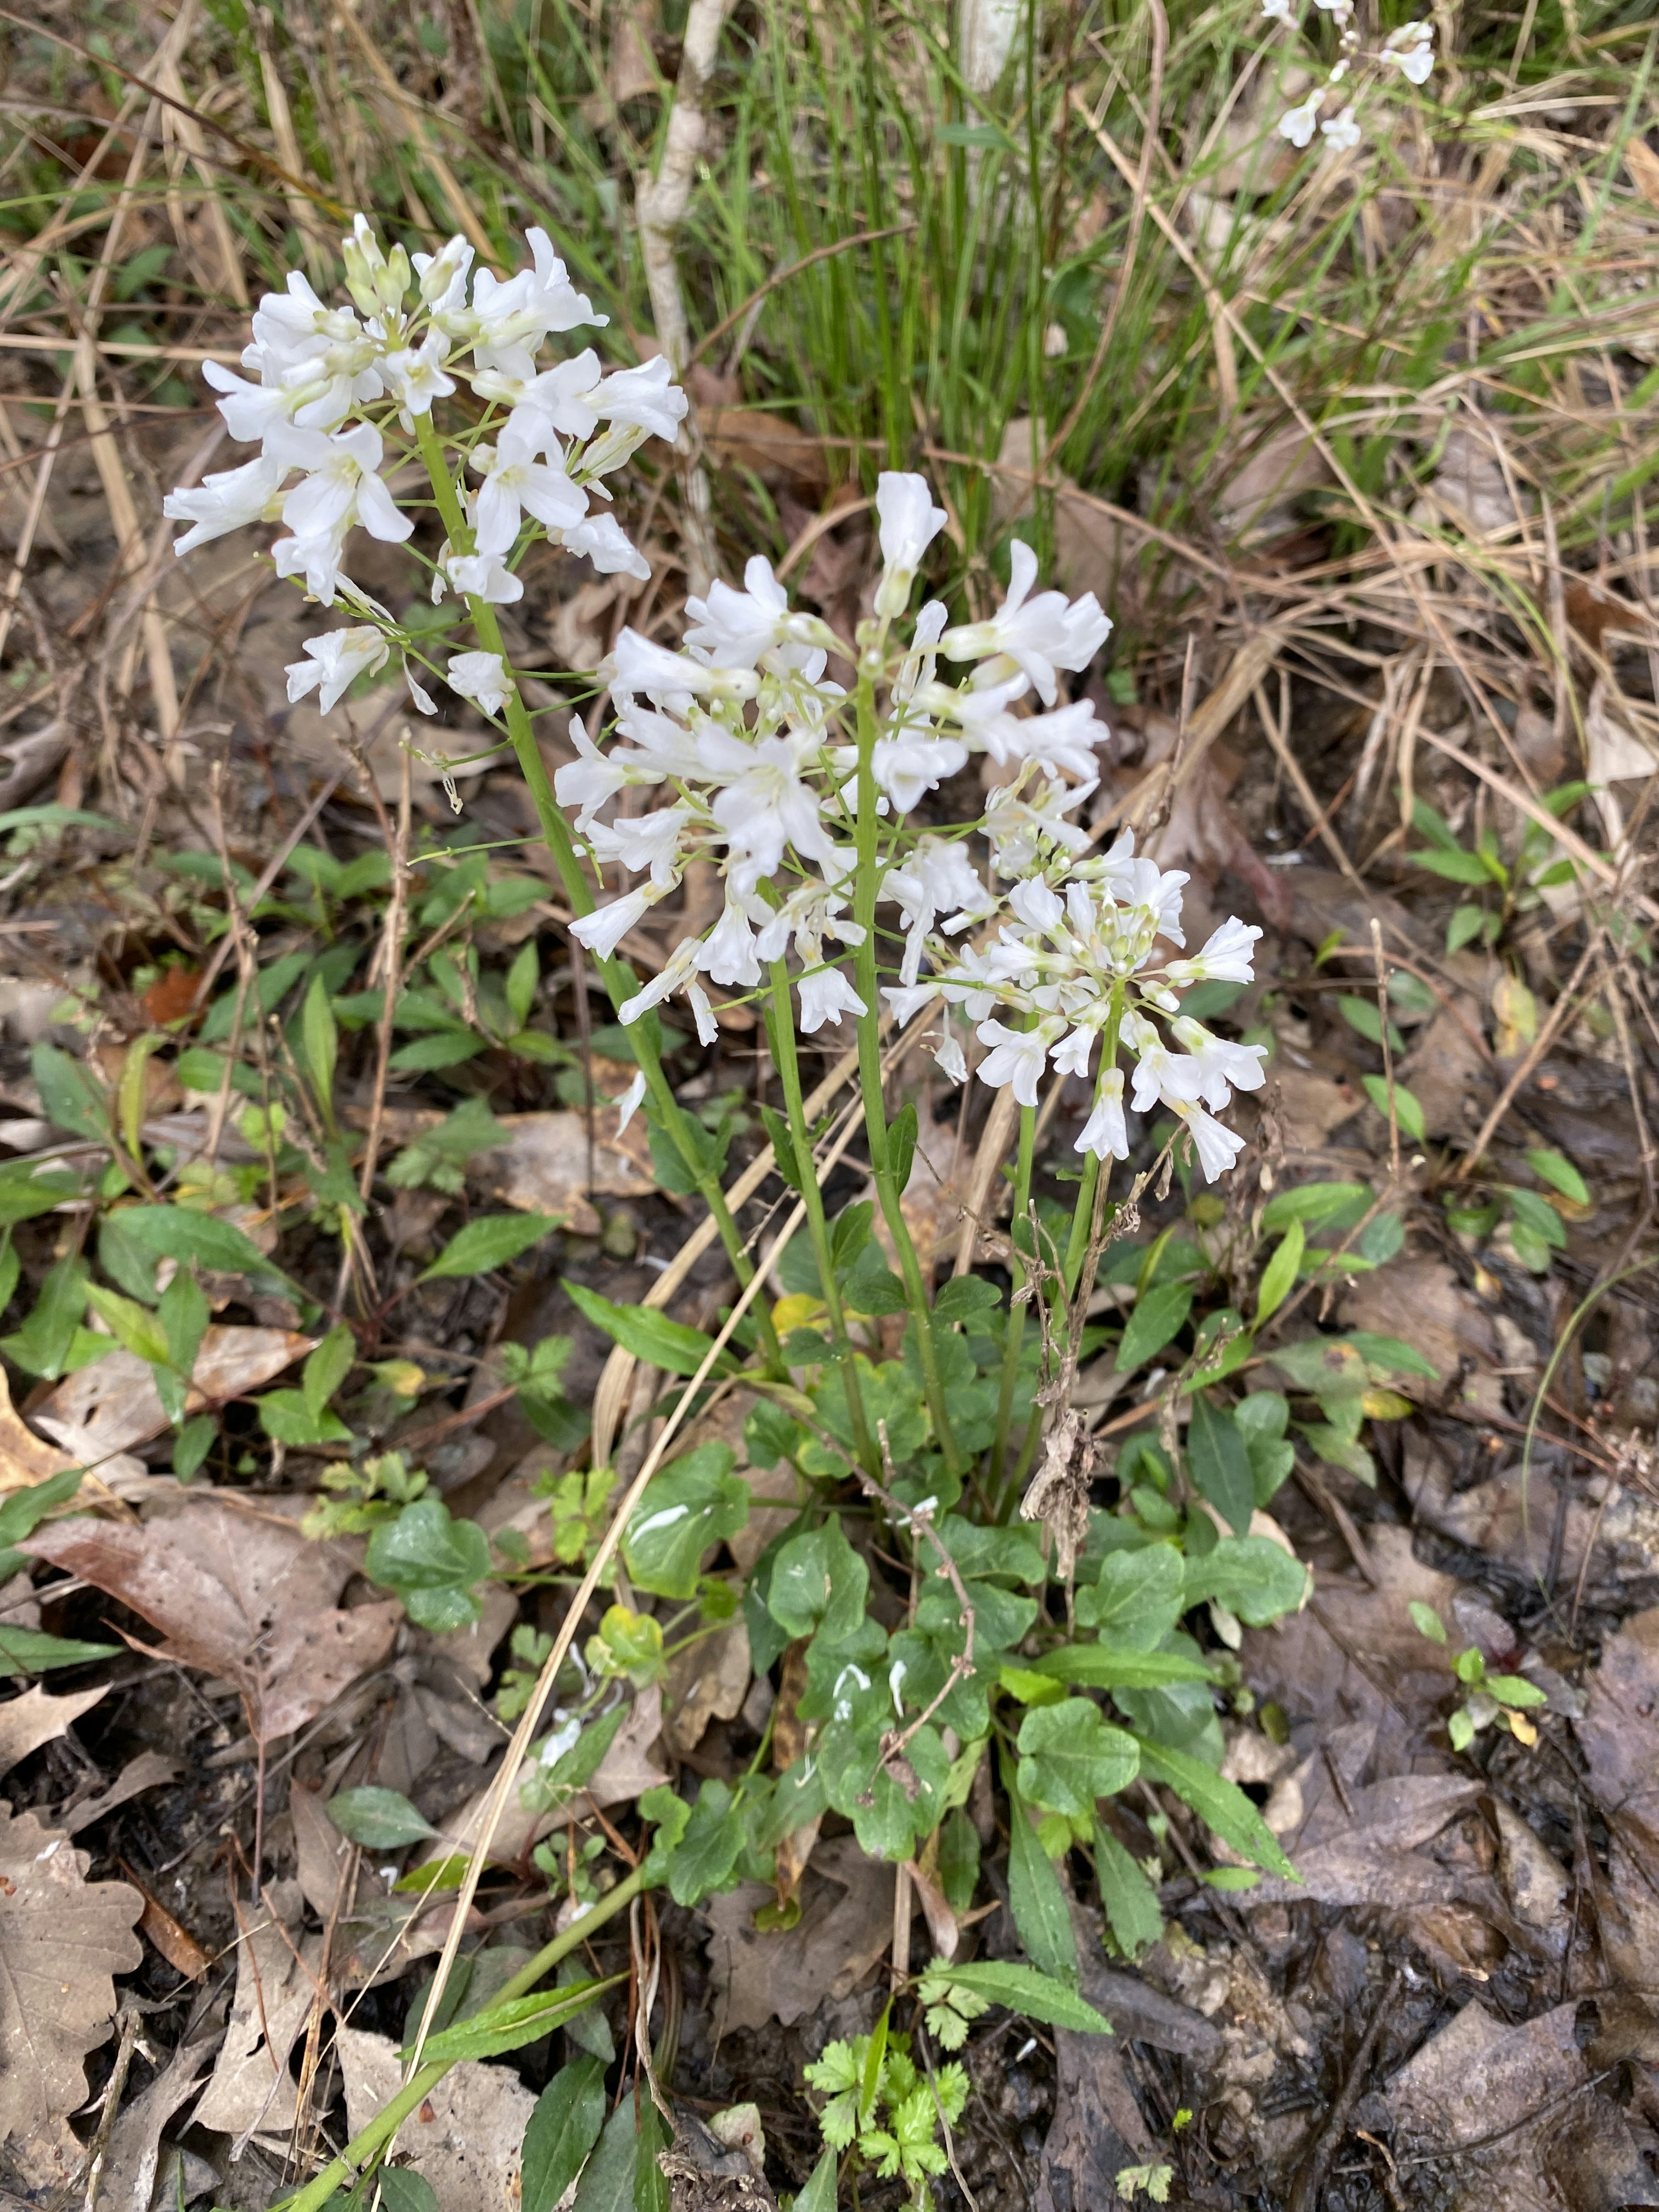 A few small plants with clusters of small white flowers and round dark green leaves grows up on the forest floor